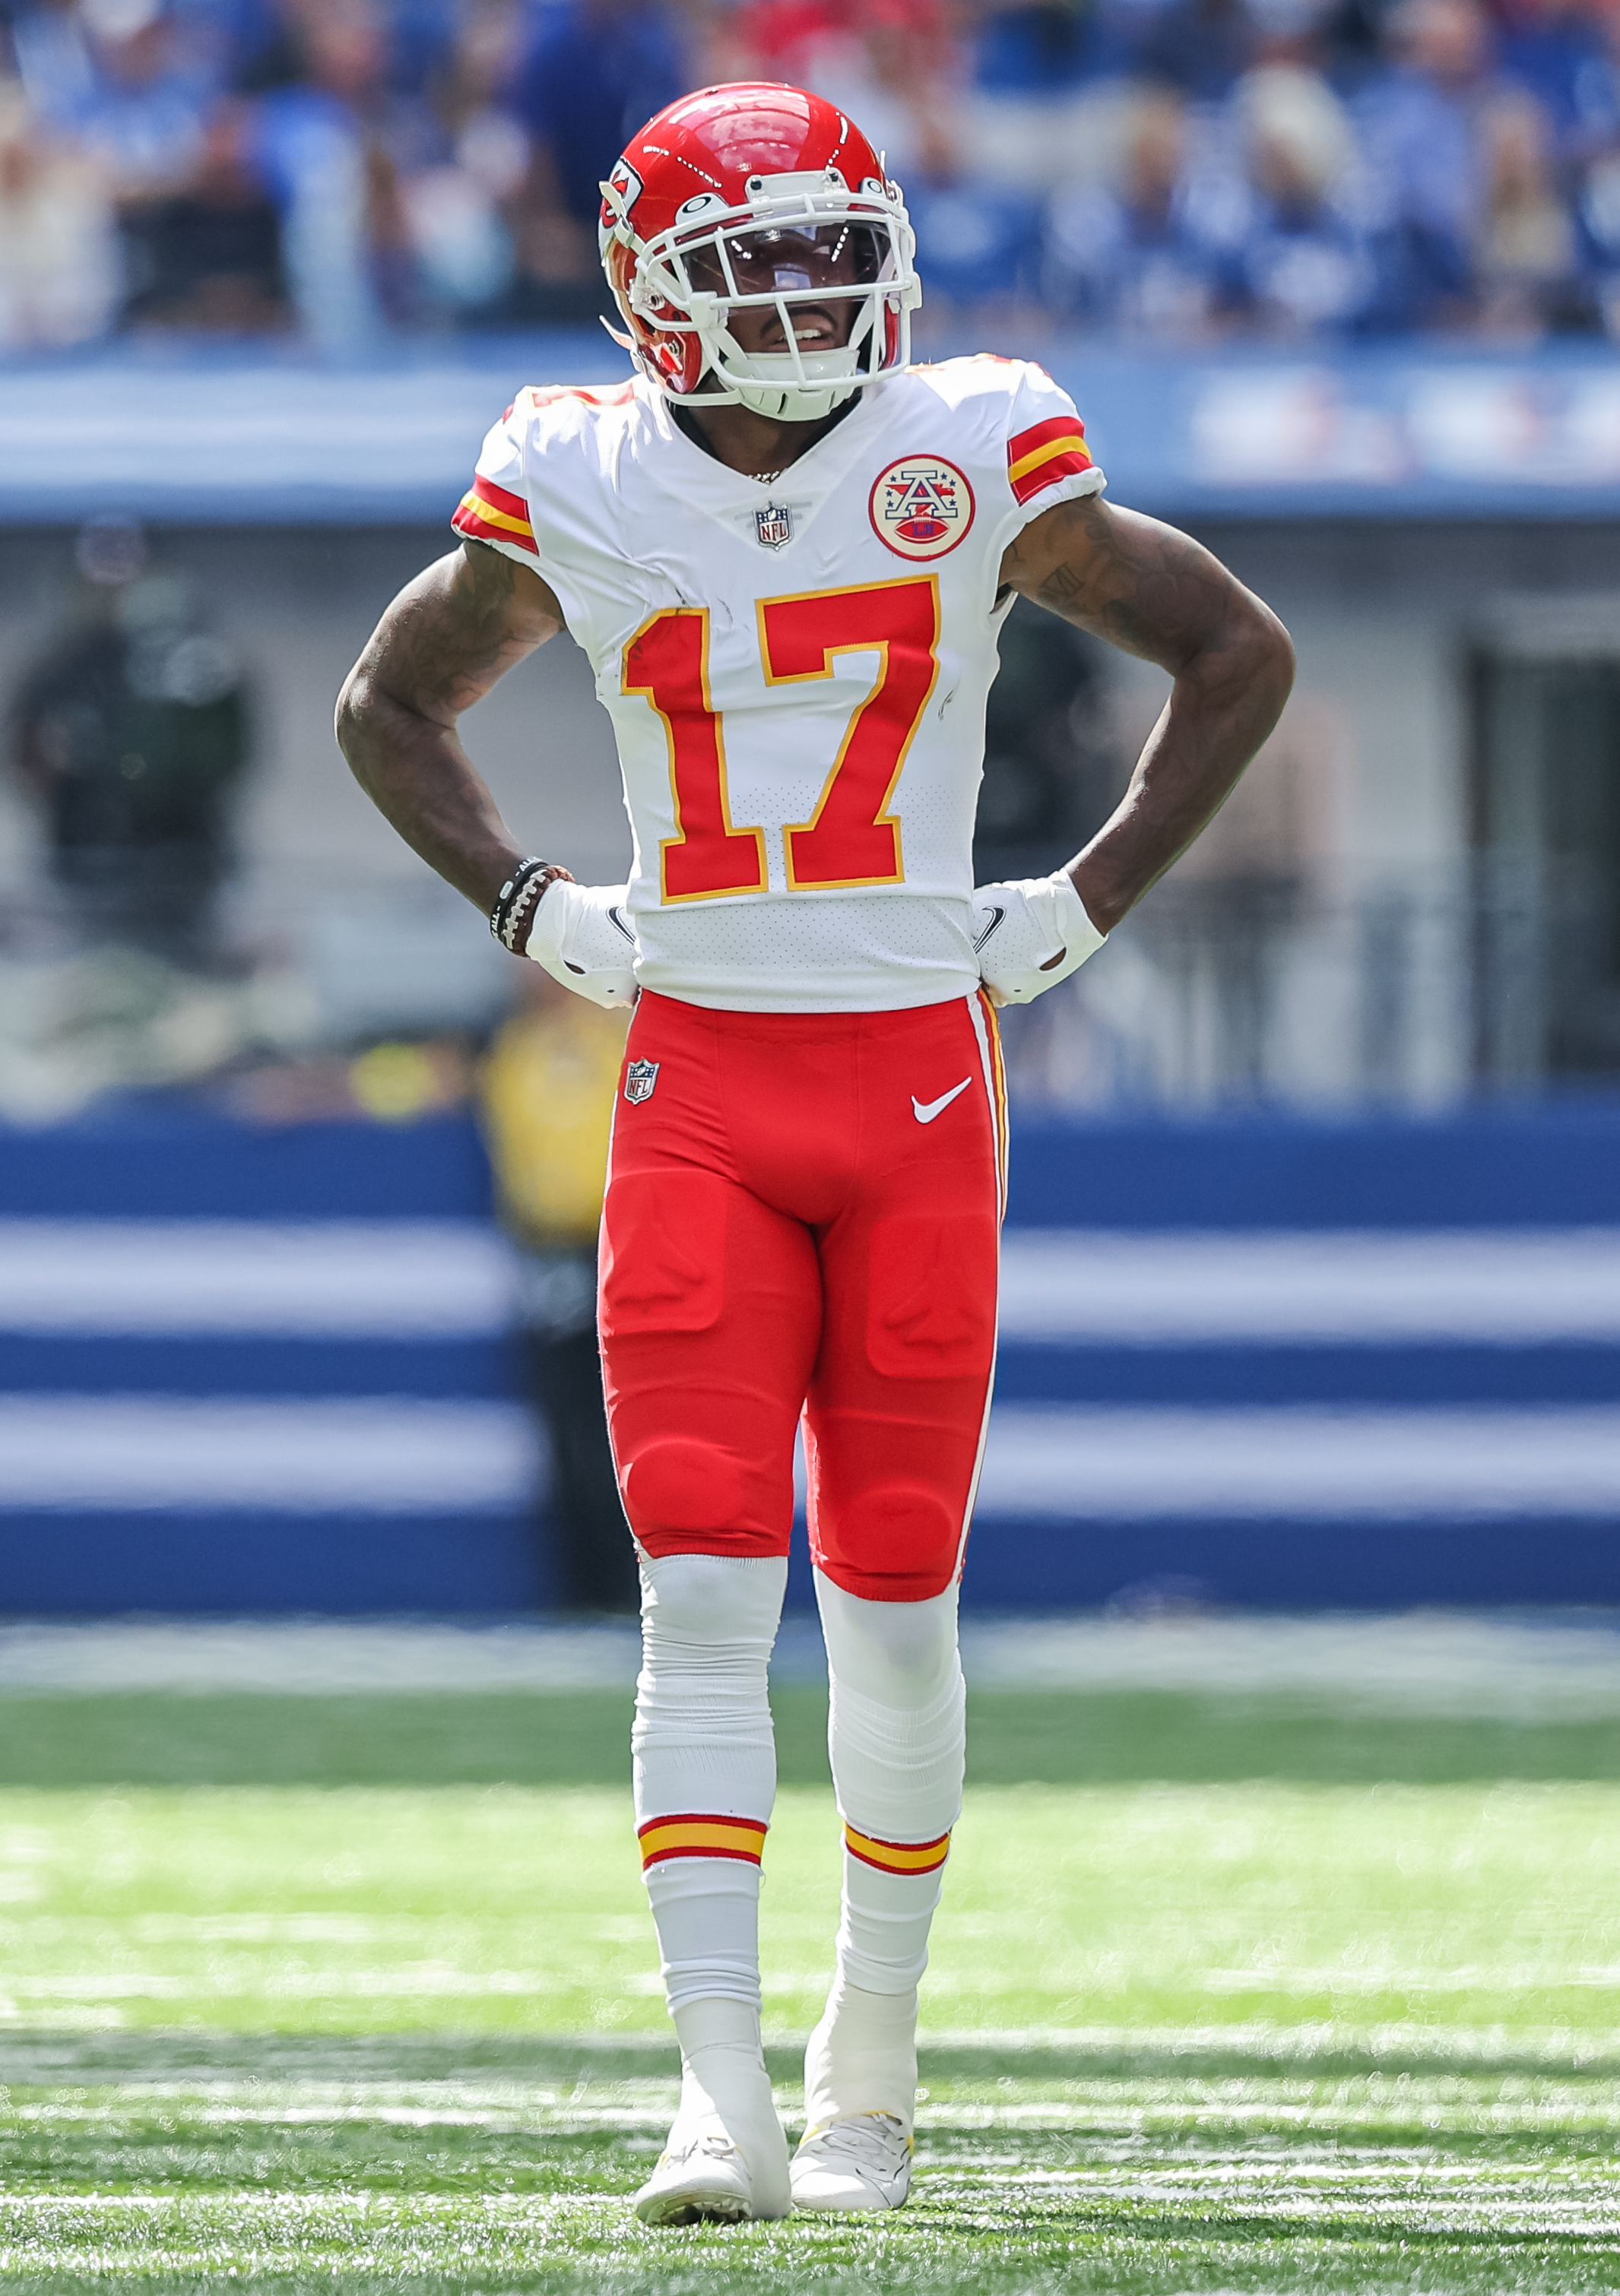 Mecole Hardman #17 of the Kansas City Chiefs is seen during the game against the Indianapolis Colts at Lucas Oil Stadium on September 25, 2022 in Indianapolis, Indiana.